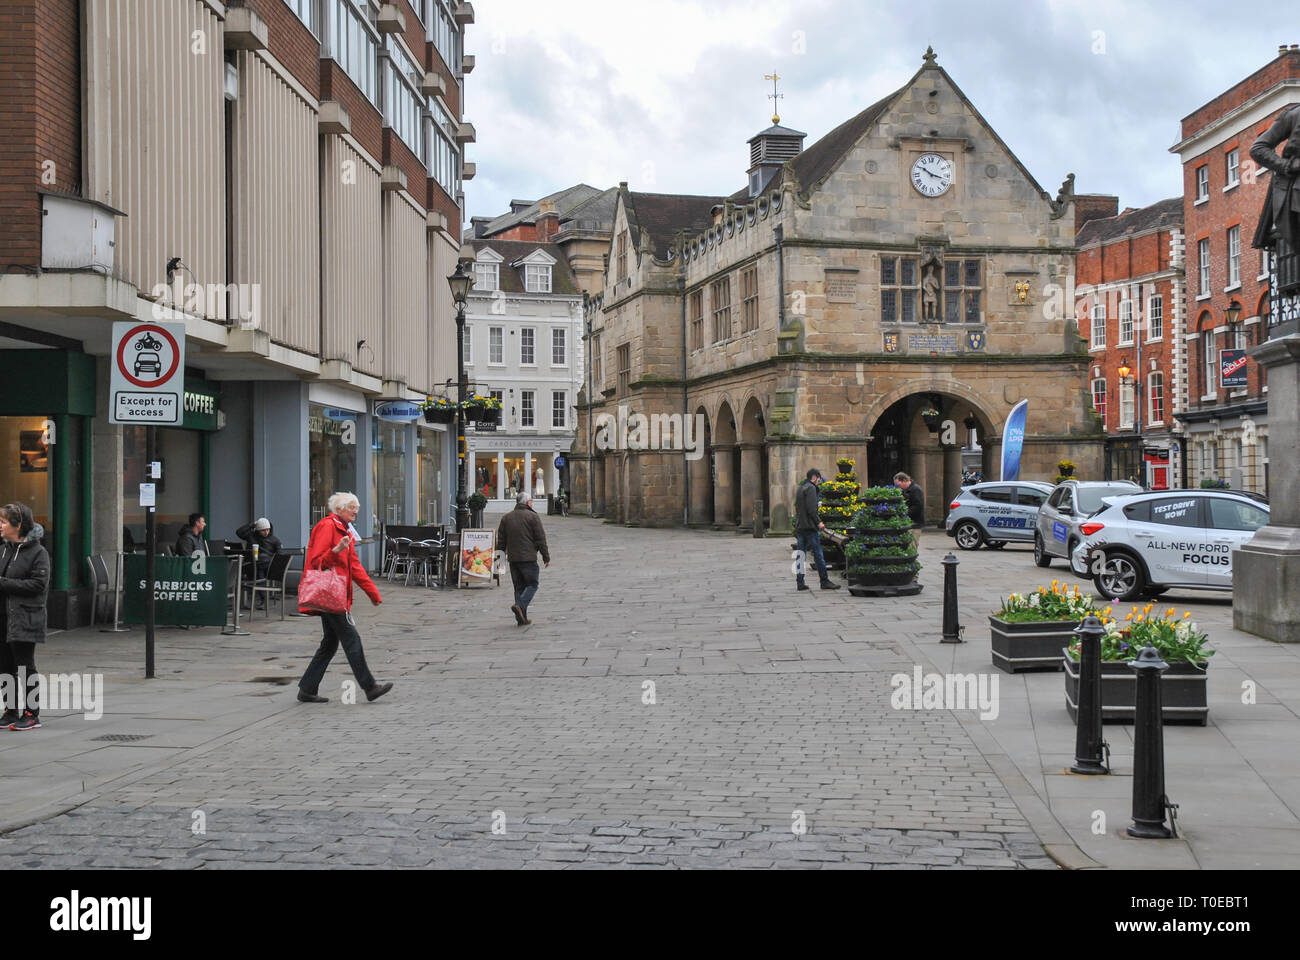 The Square in Shrewsbury showing The Old Market Hall and people Stock Photo